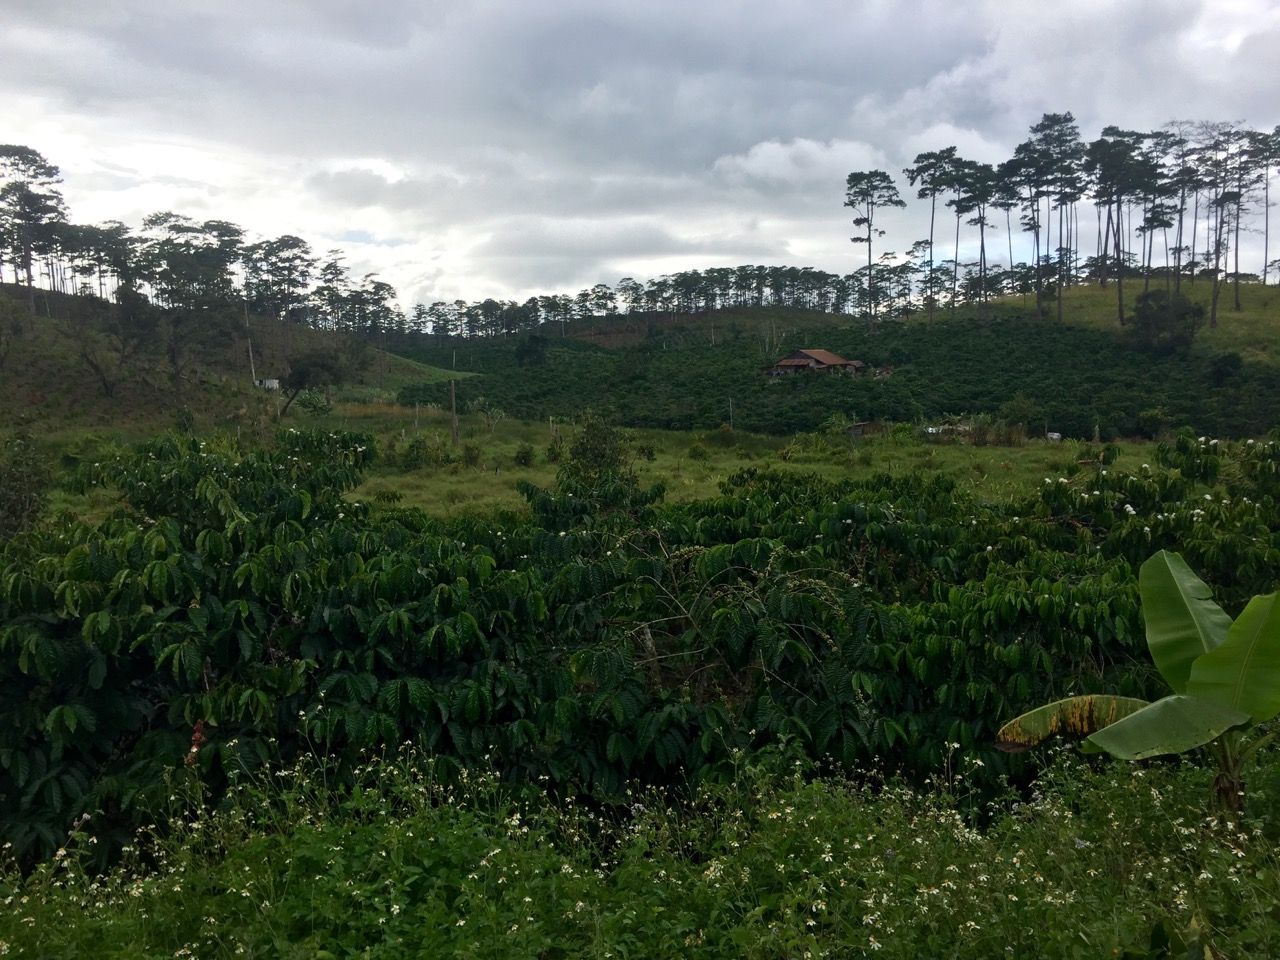 A coffee field with a single house in the middle.